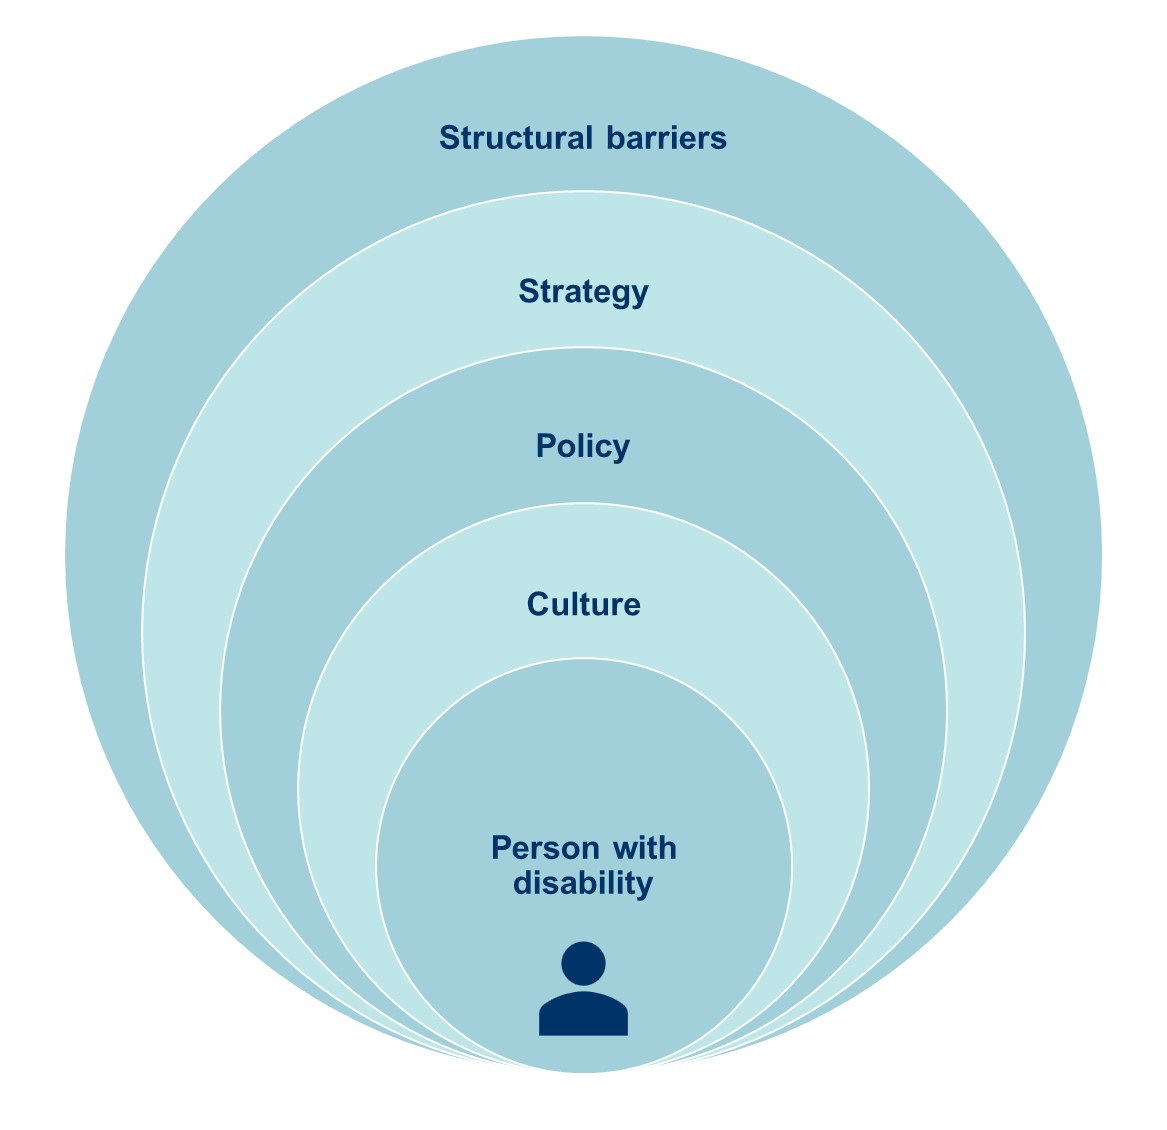 This framework is a series of concentric circles with the person with disability central. A good disability inclusion framework should address key areas within the organisation to improve inclusion - strategy, policy, structural barriers and culture.